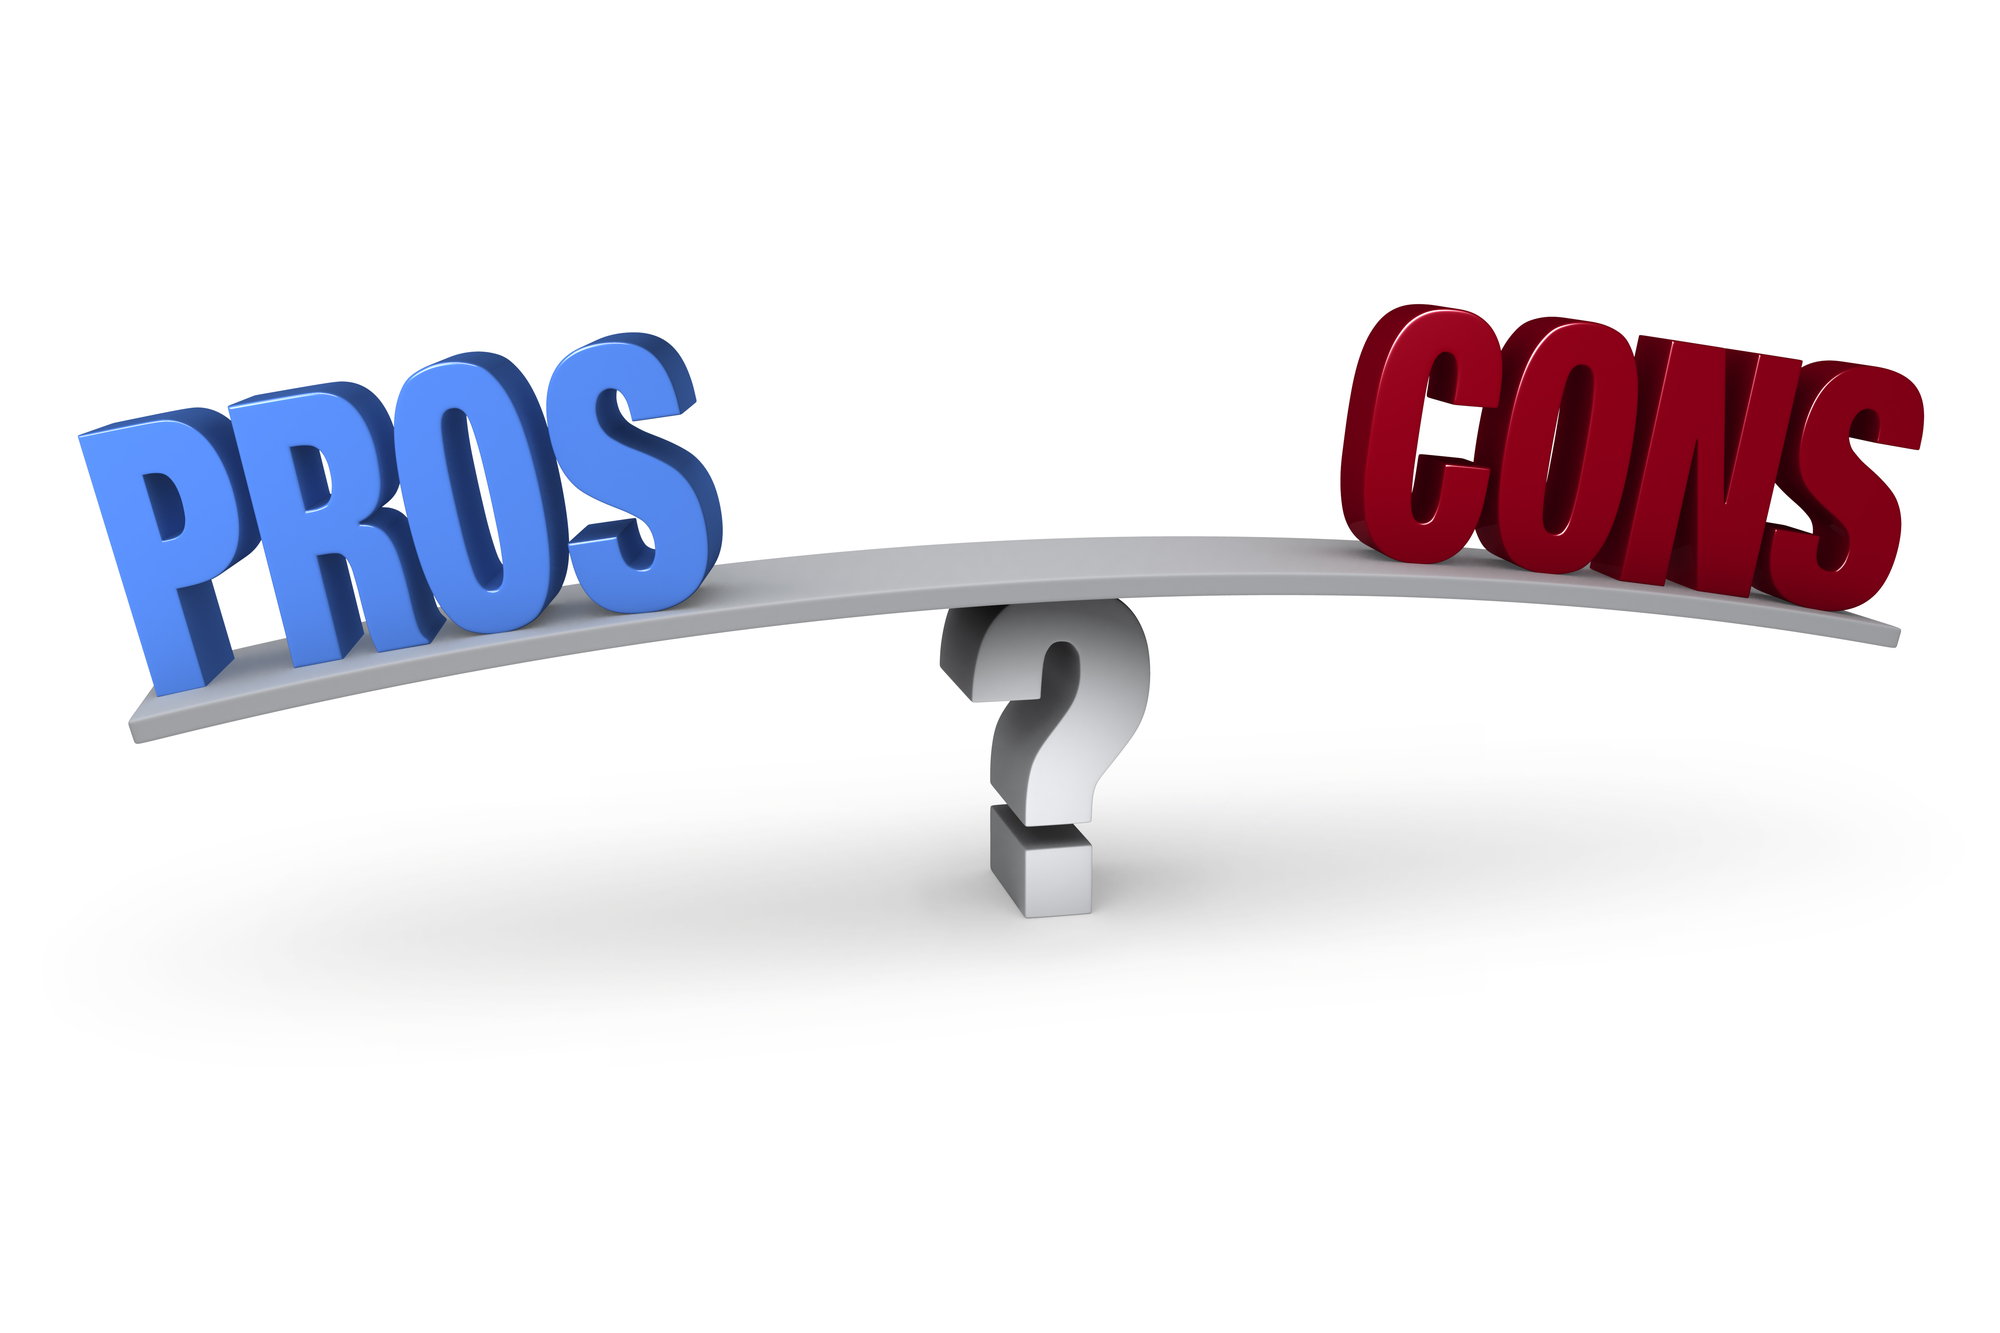 A bright, blue "PROS" and a red "CONS" sit on opposite ends of a gray board which is balanced on a white question mark. Isolated on white.